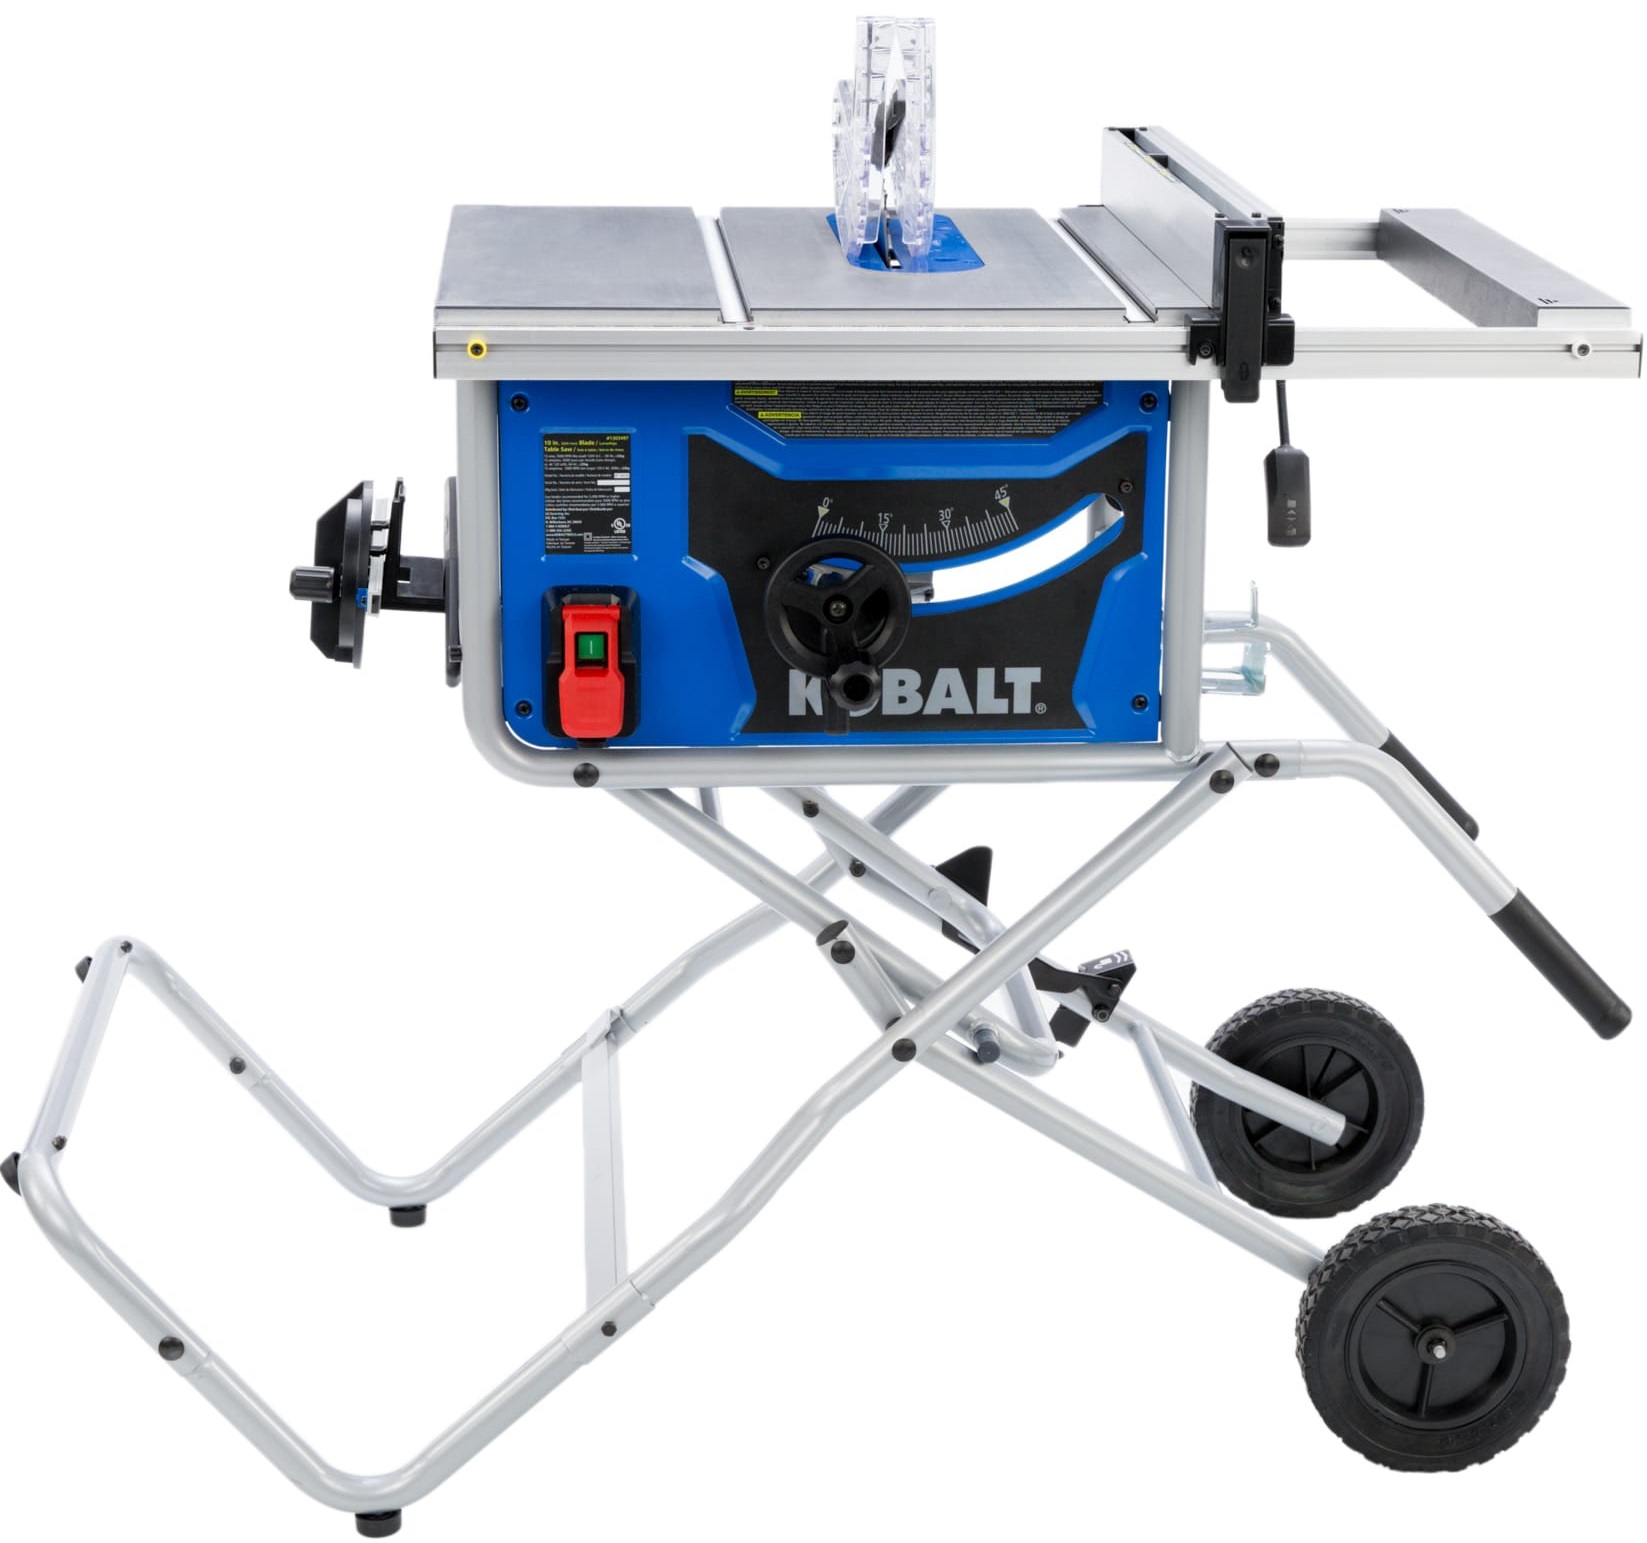 Kobalt 10-in Carbide-tipped Blade 15-Amp Portable Jobsite Table Saw | KT10152 $259